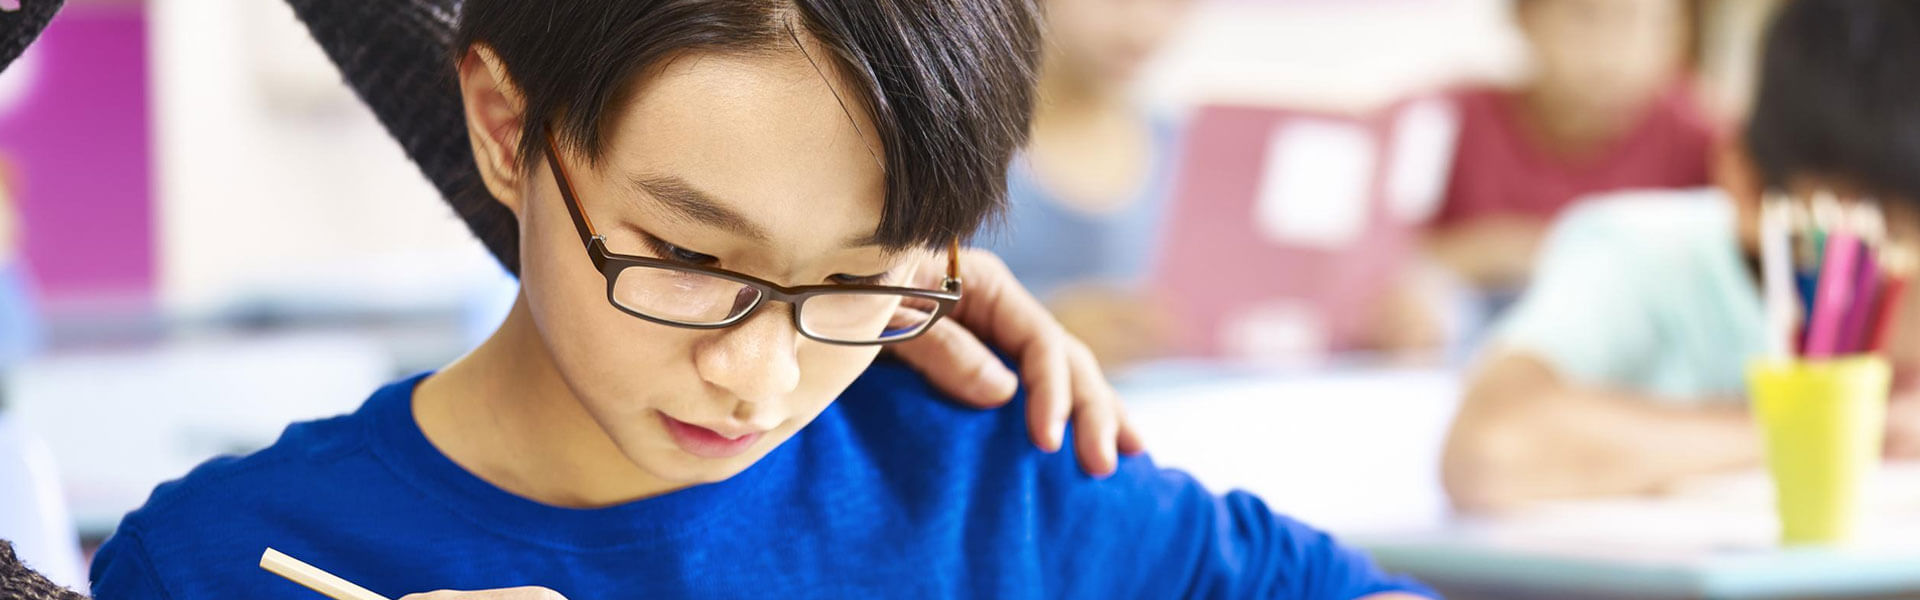 Can I Protect My Child From Becoming So Nearsighted?